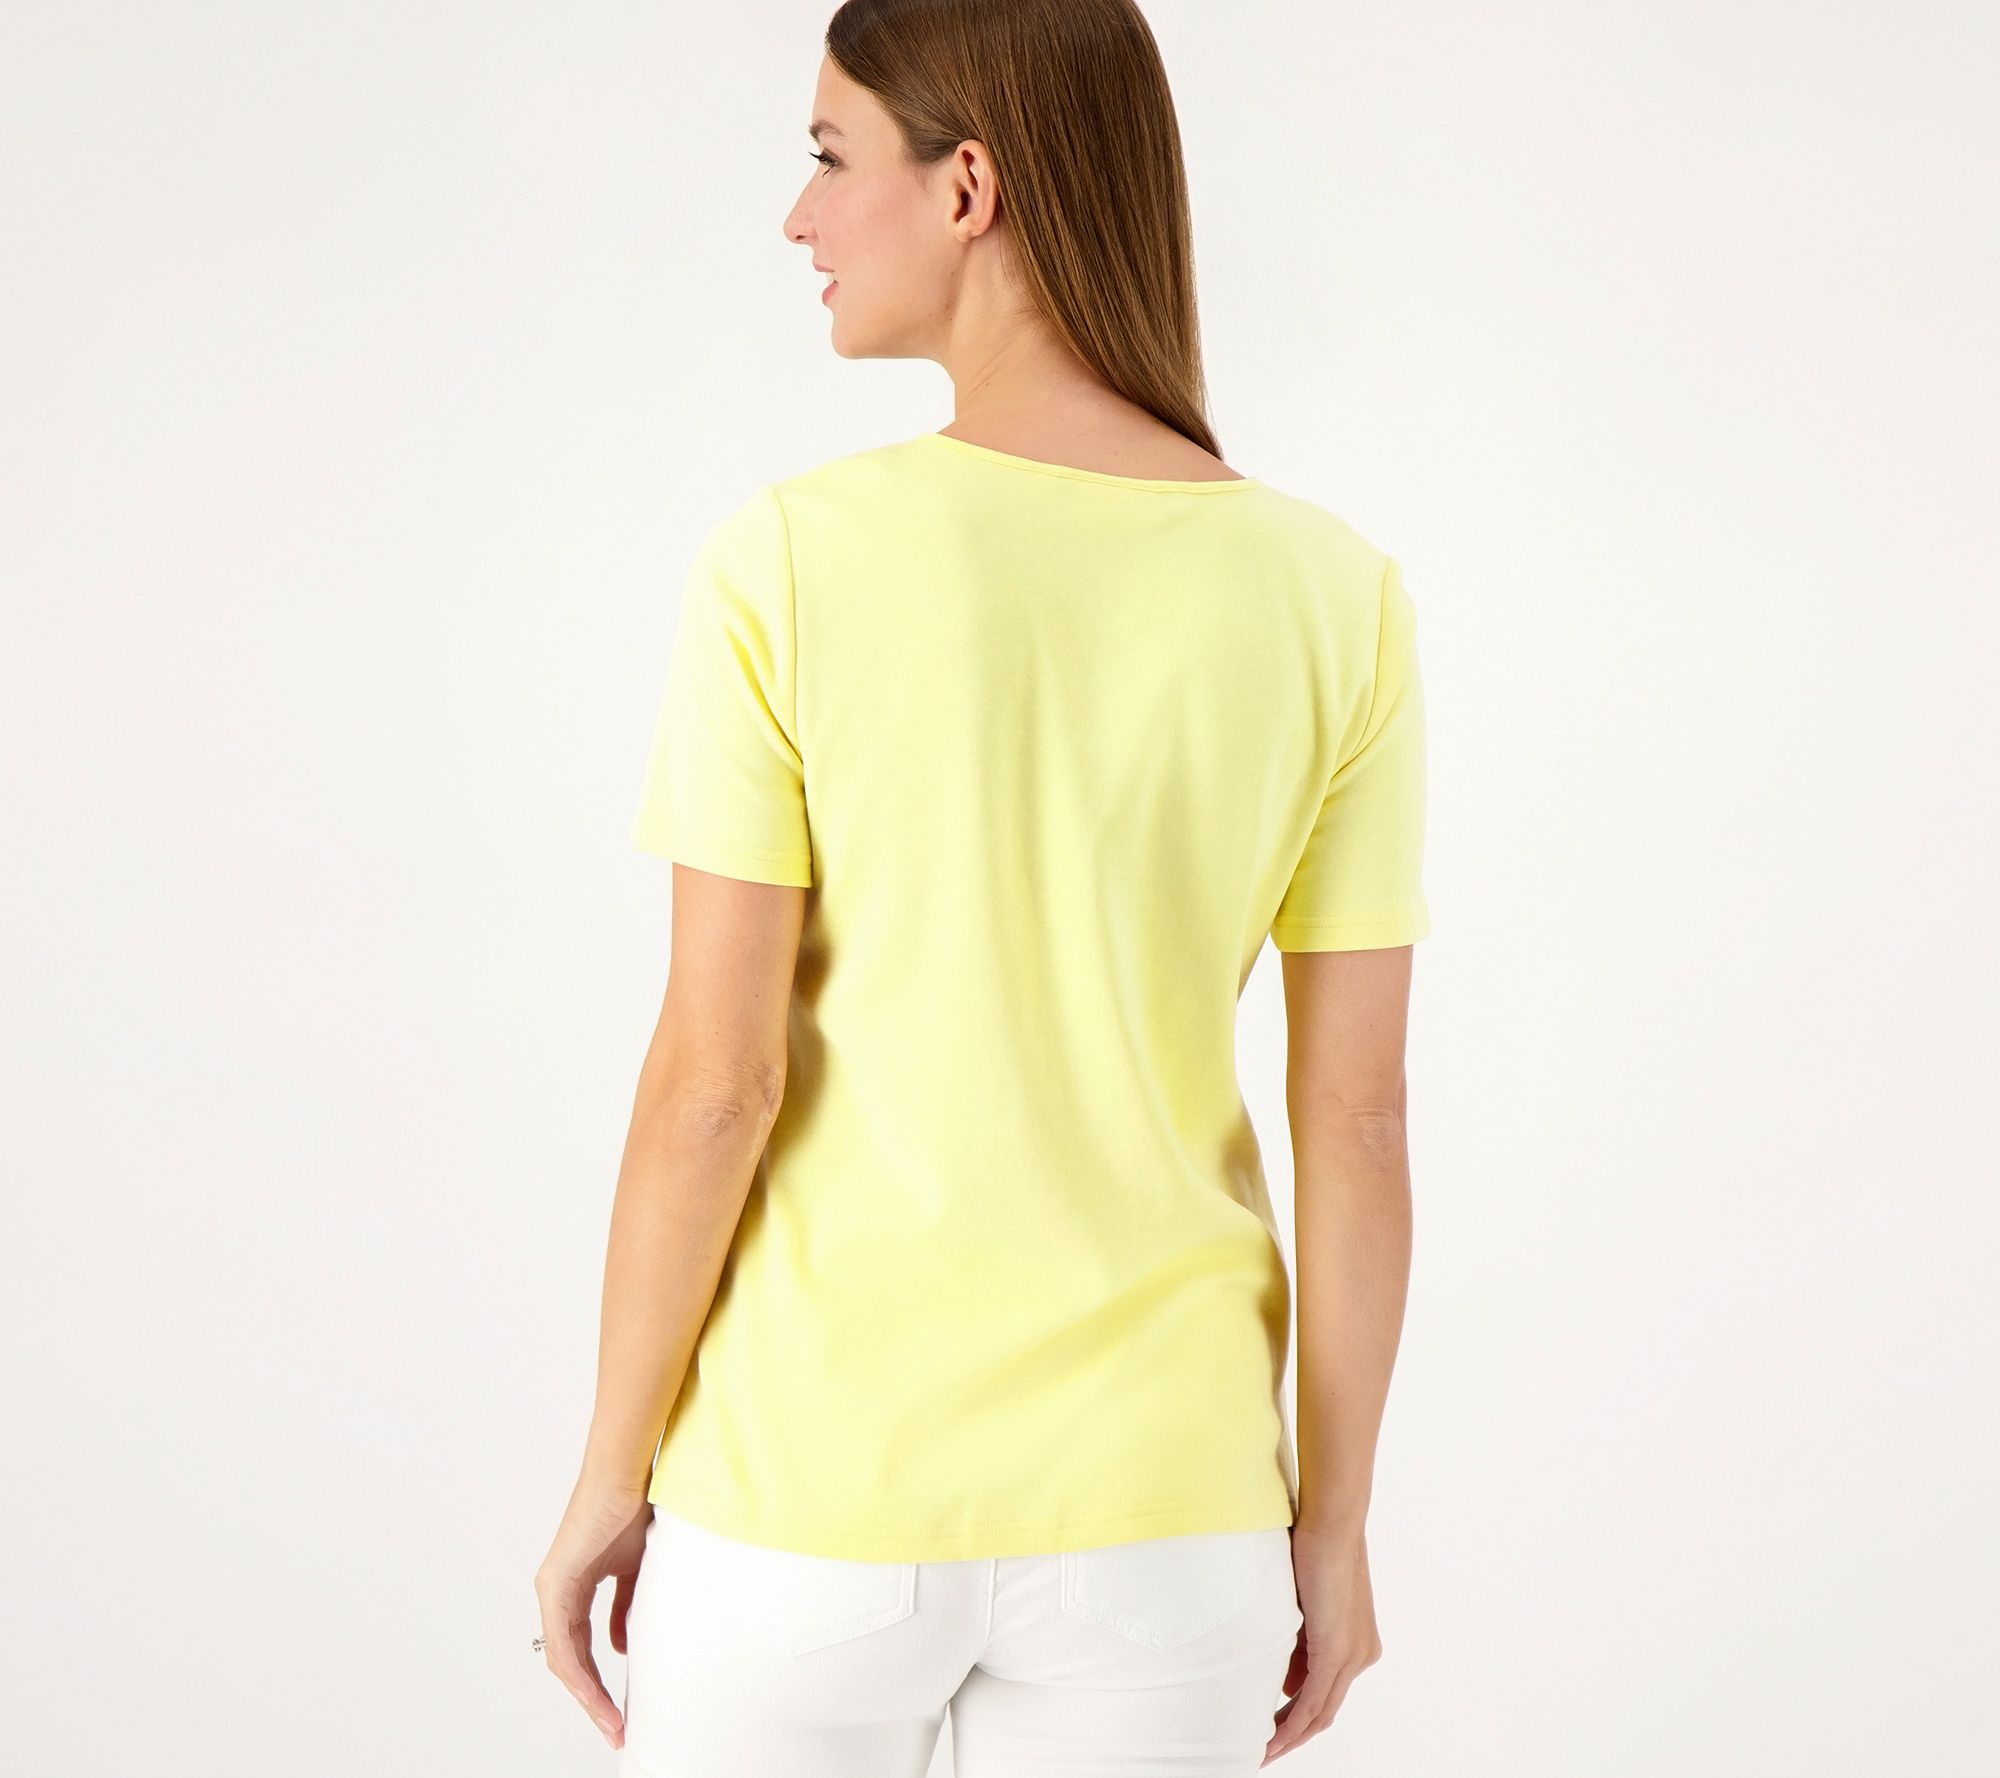 Quacker Factory Set of Two Lace and Shine Short Sleeve Tops - QVC.com